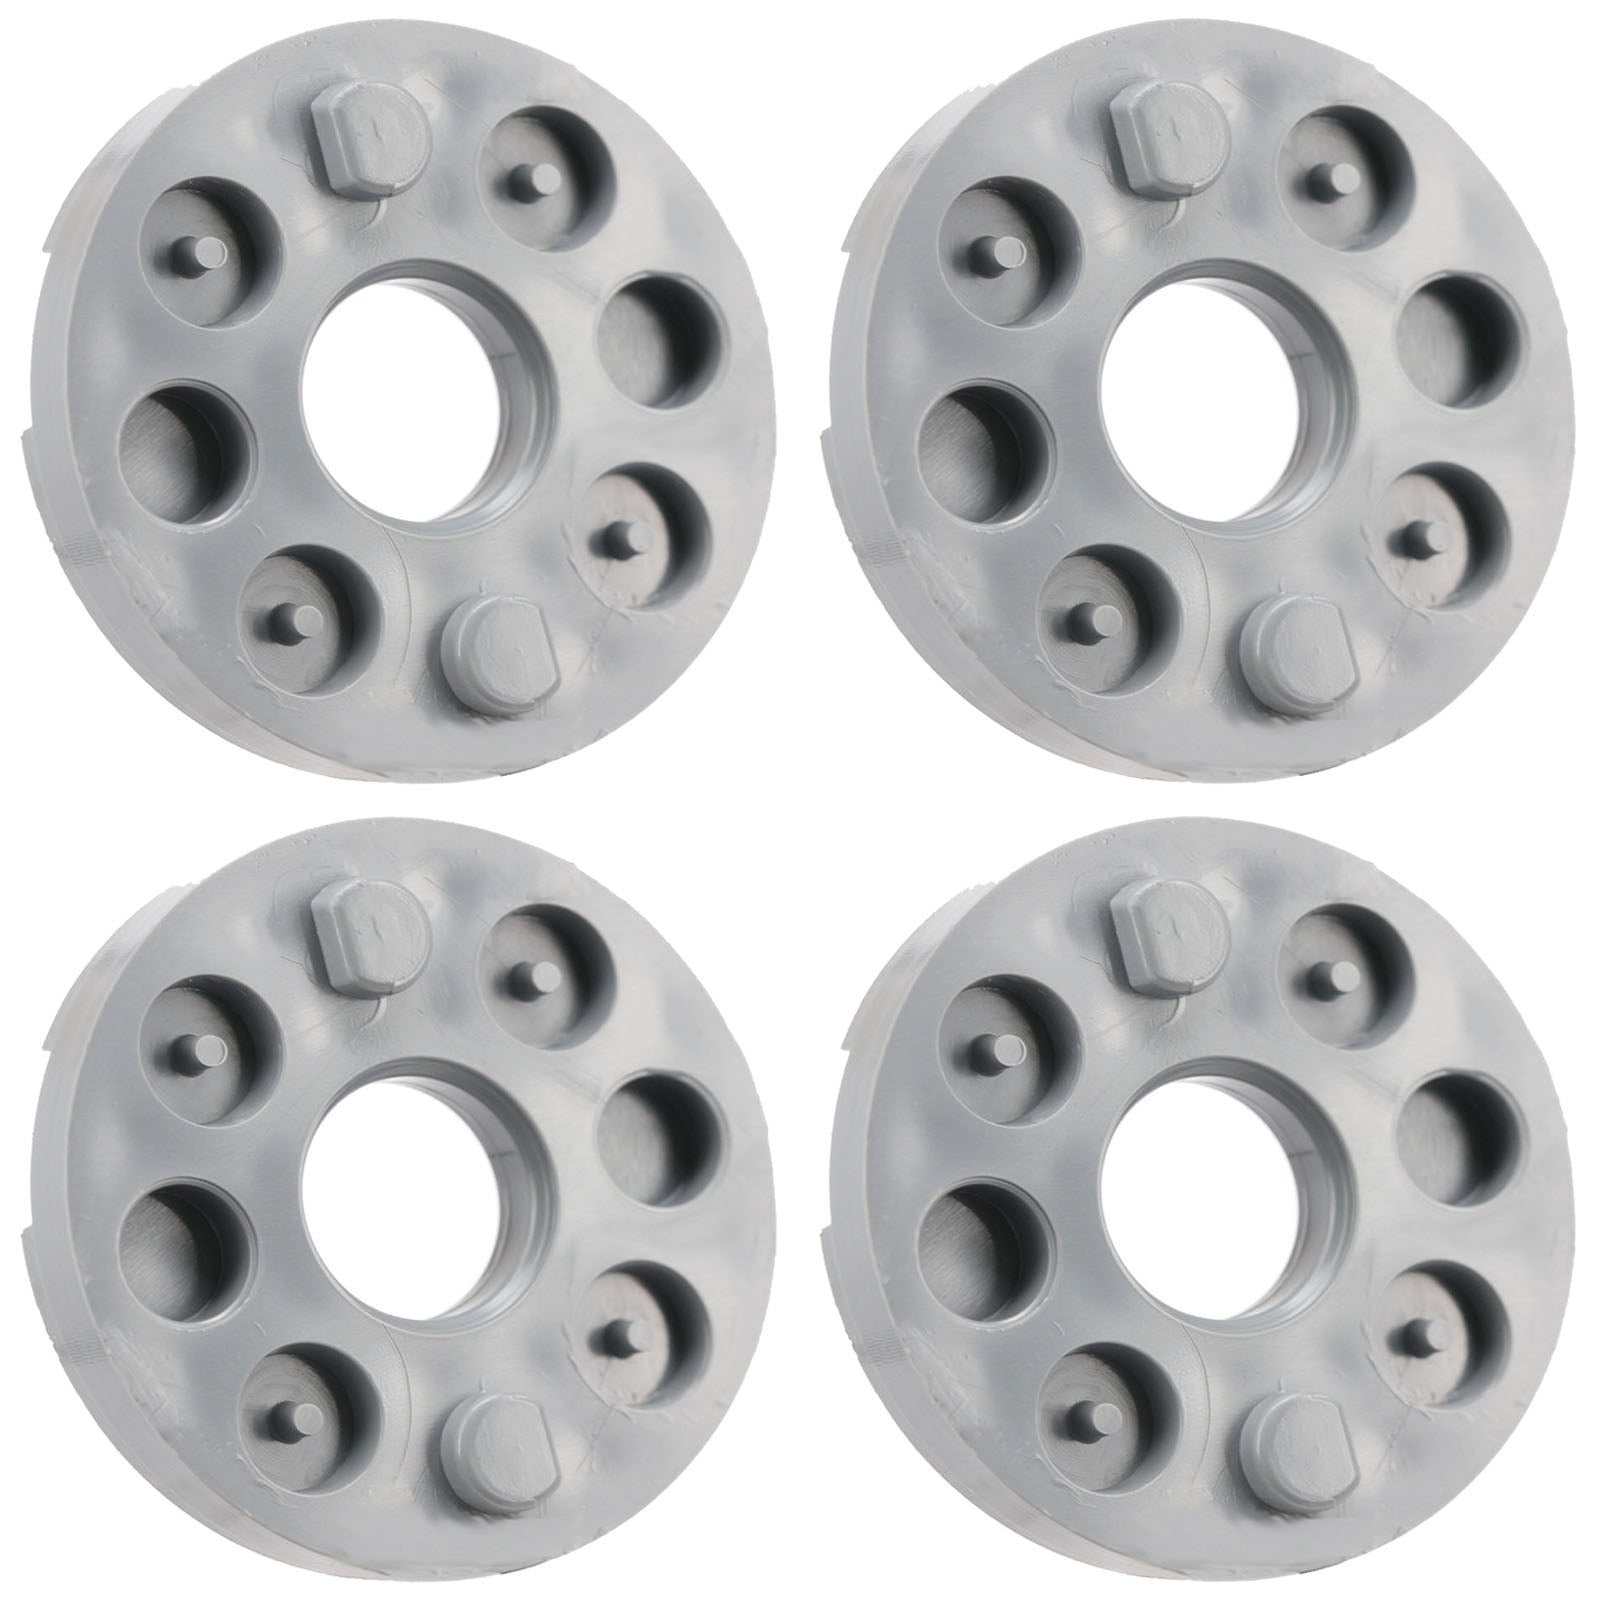 Blade Height Spacers for FLYMO Sprinter Sprintmaster Turbo Compact Vision Lawnmower x 4